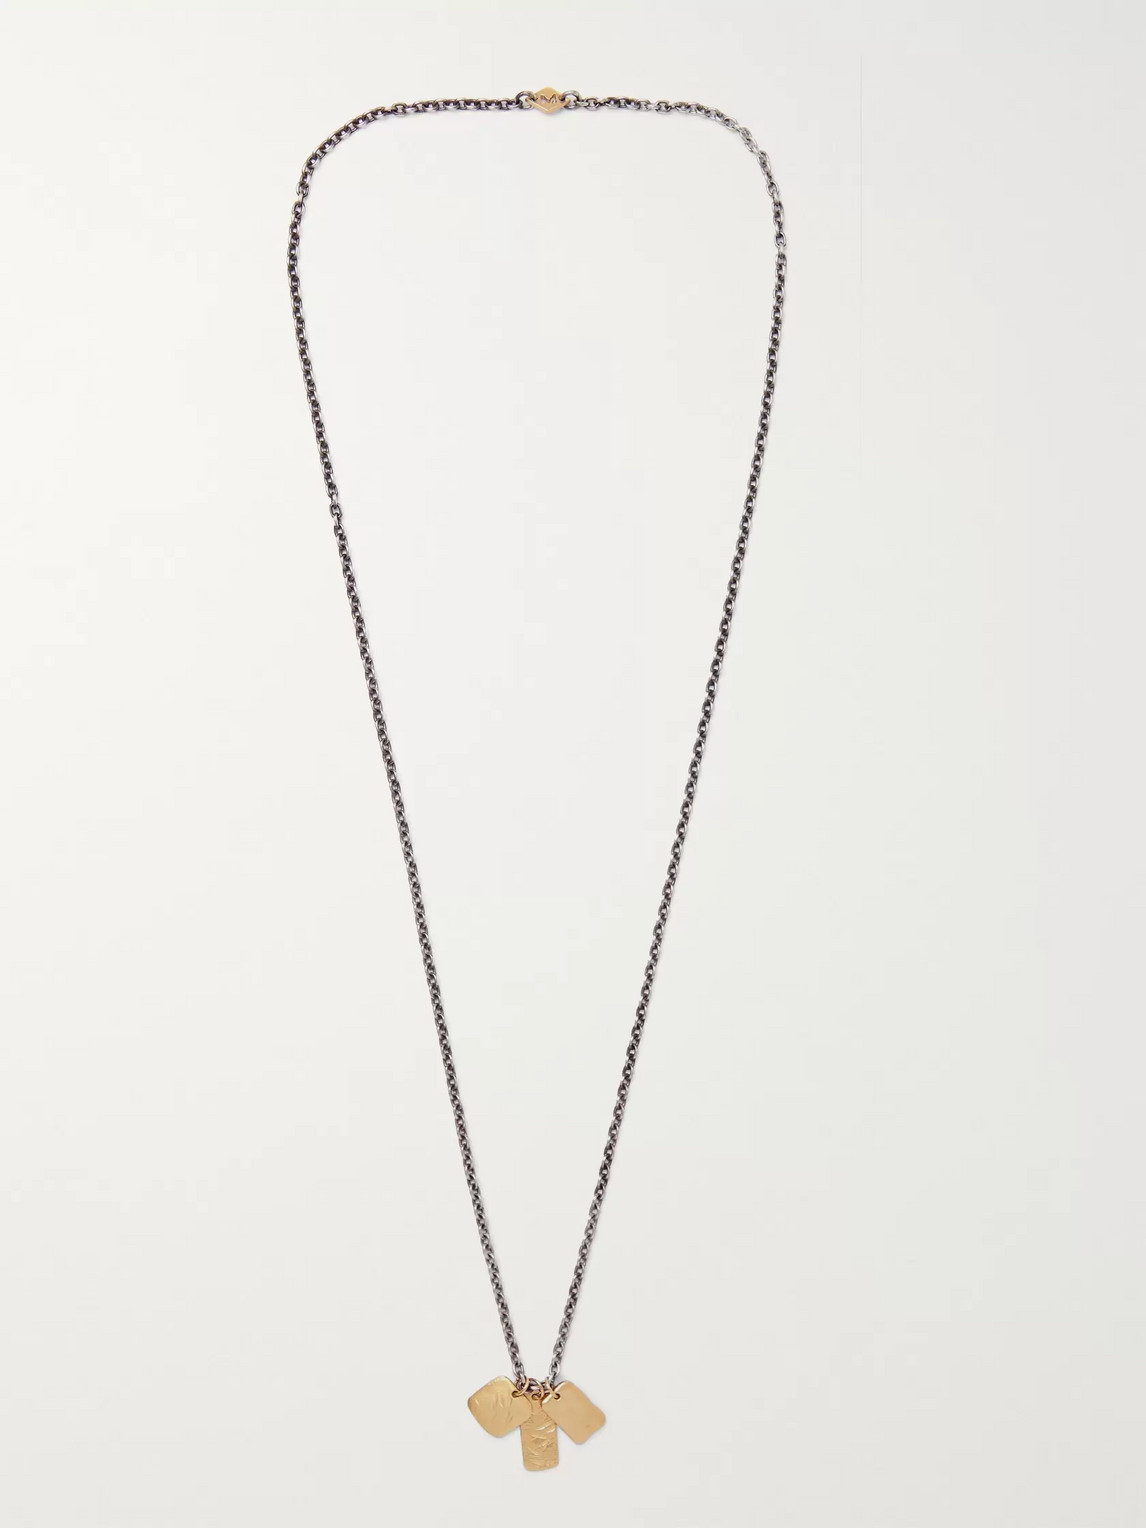 Mcohen Oxidised Sterling Silver And 18-karat Gold Necklace